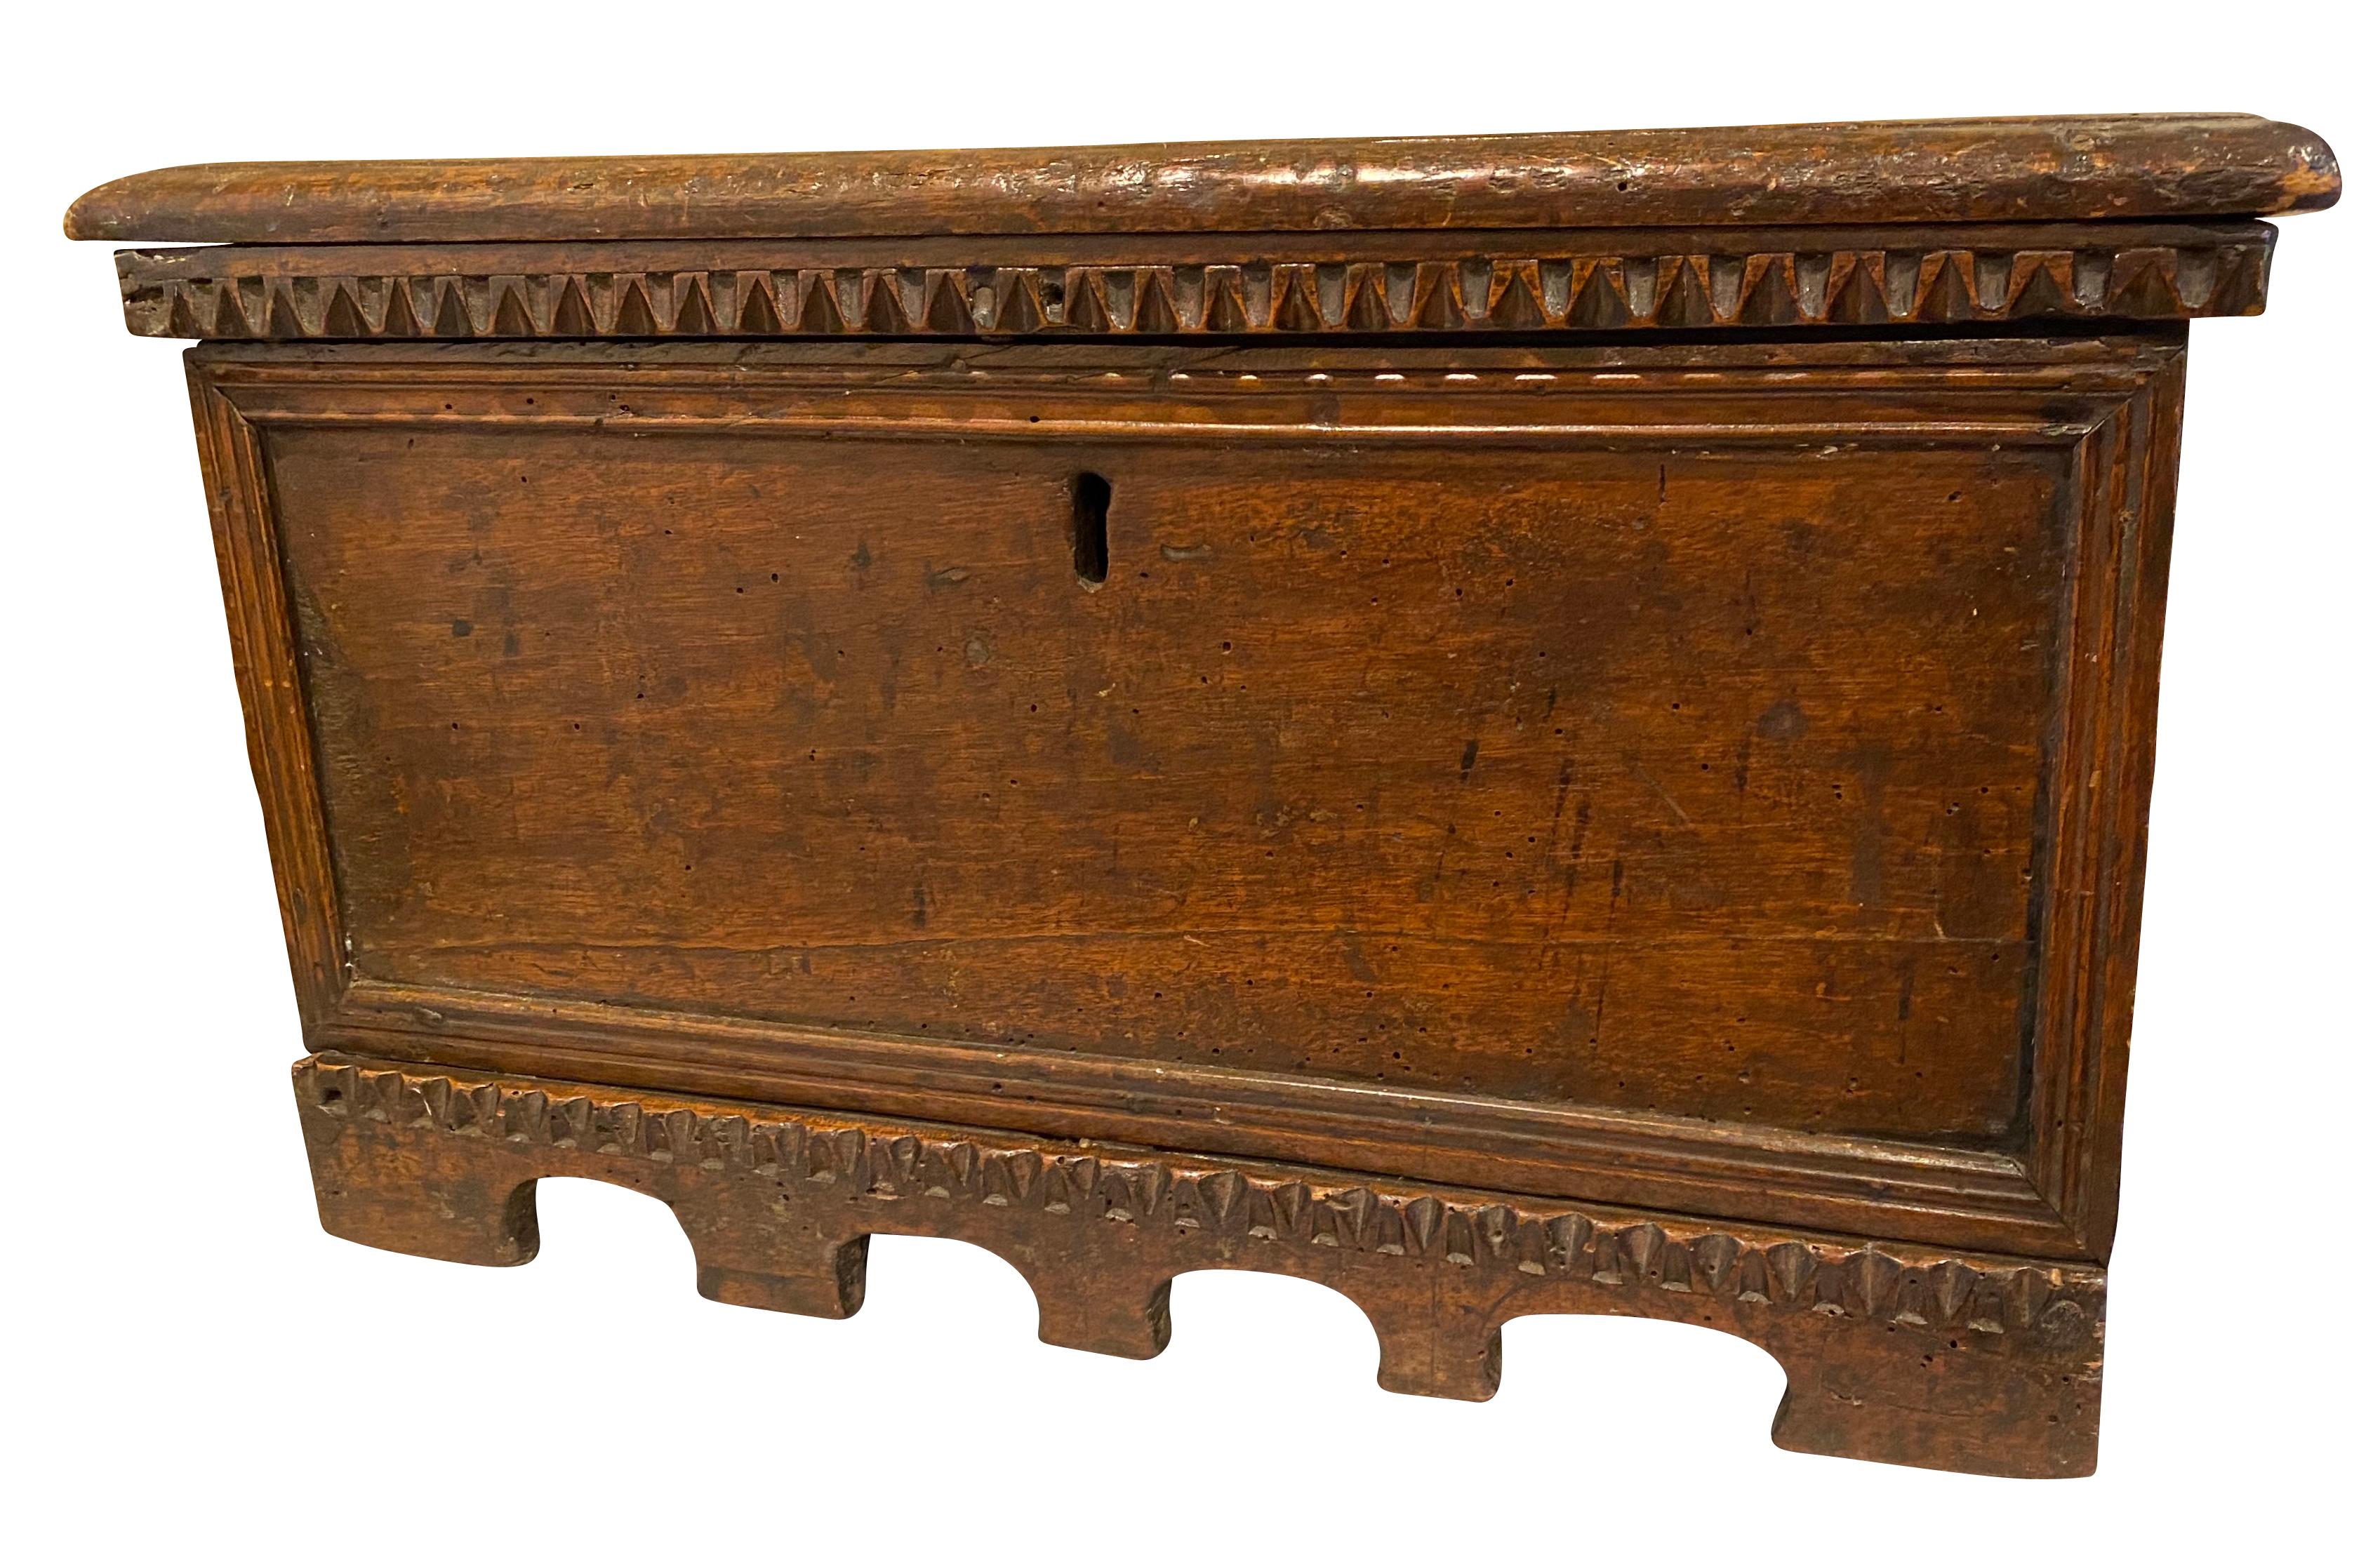 A dwarf cassone with hinged top with chip carved edge over a paneled case with central keyhole, arcaded carved base.